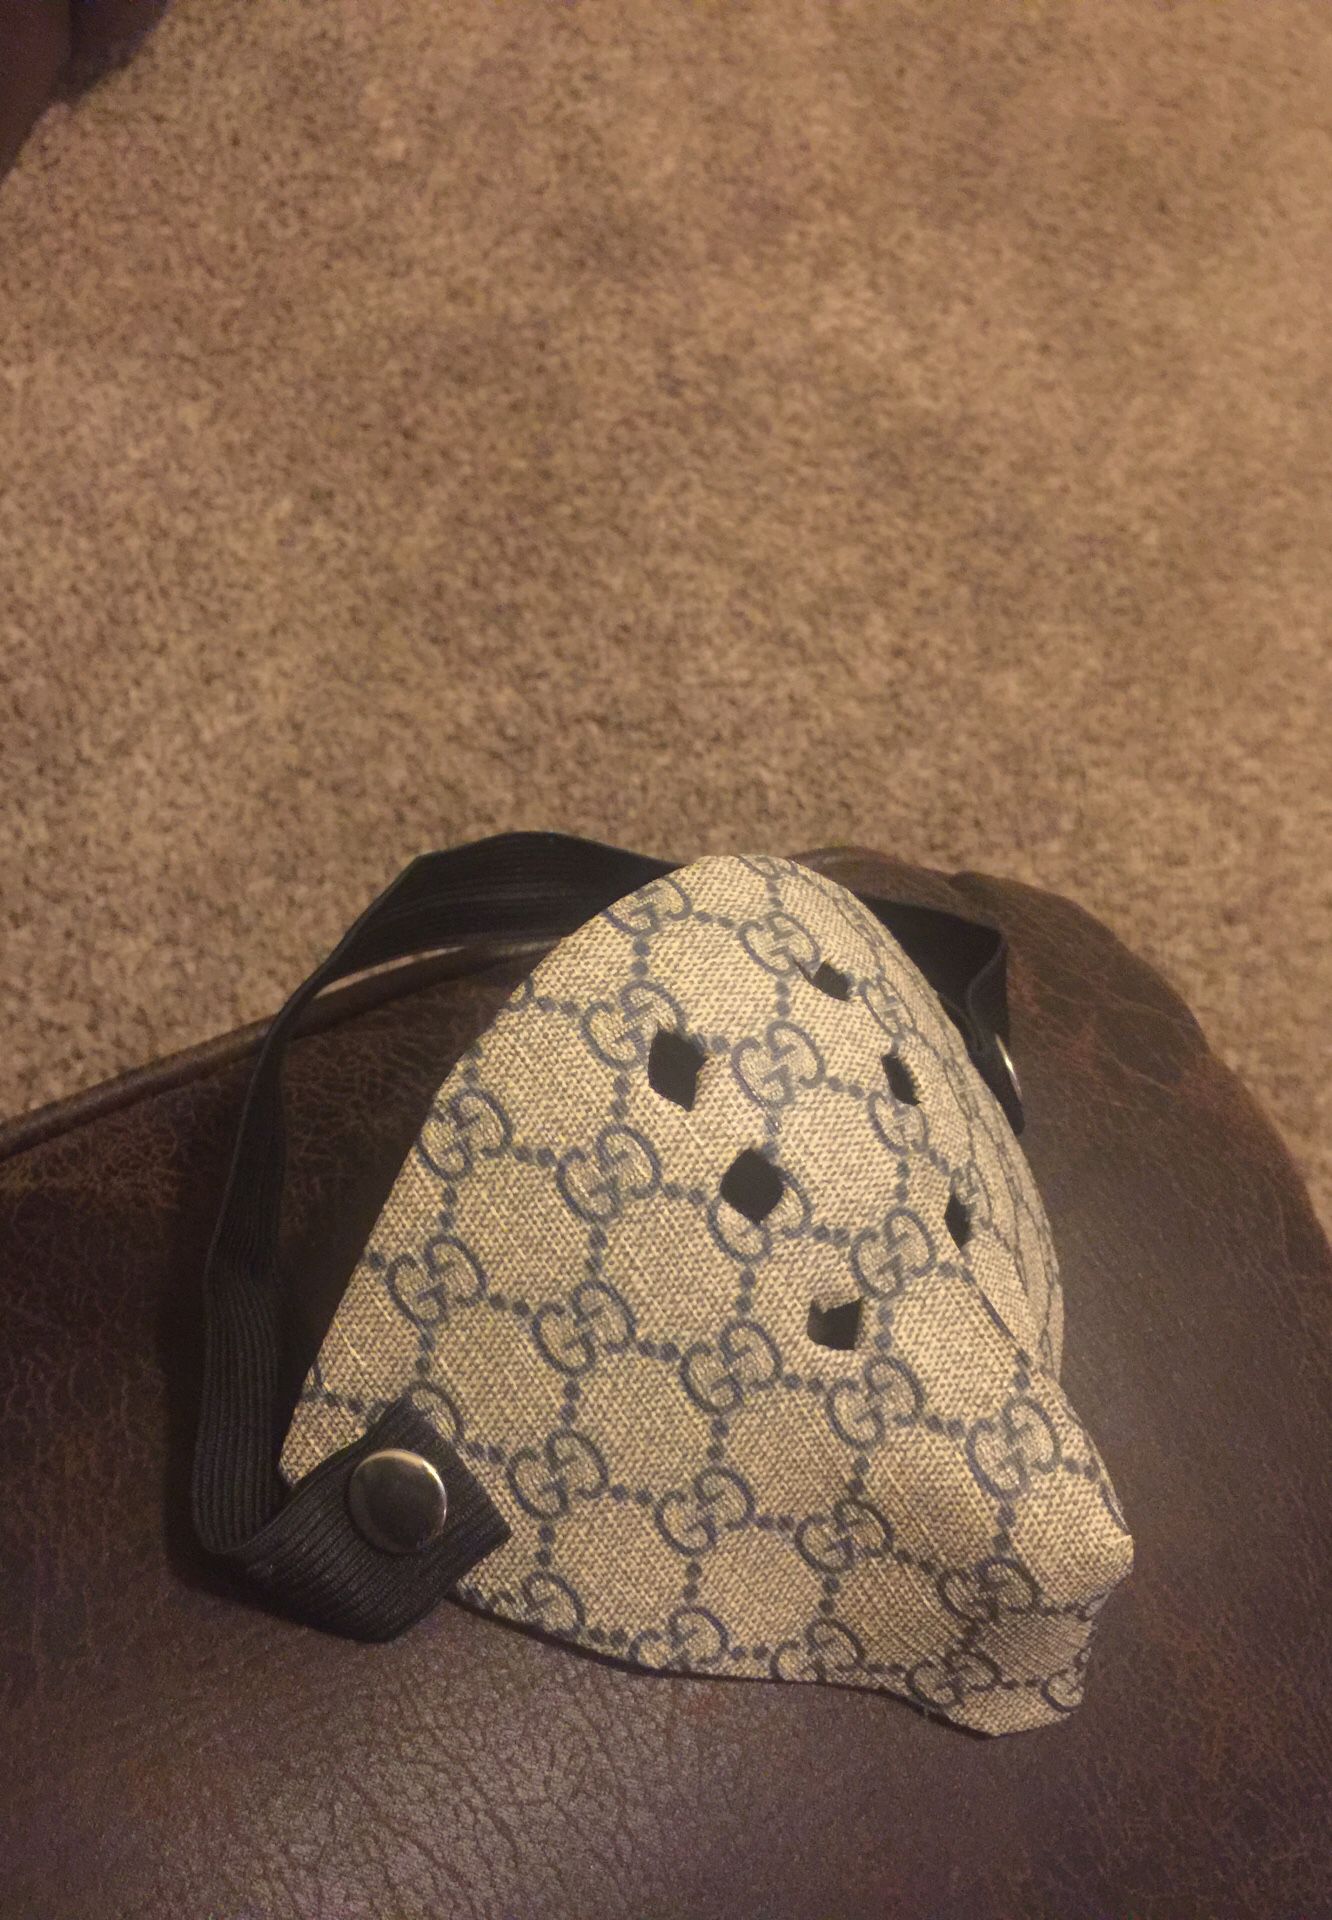 Gucci hockey mask for Sale in St. MO -